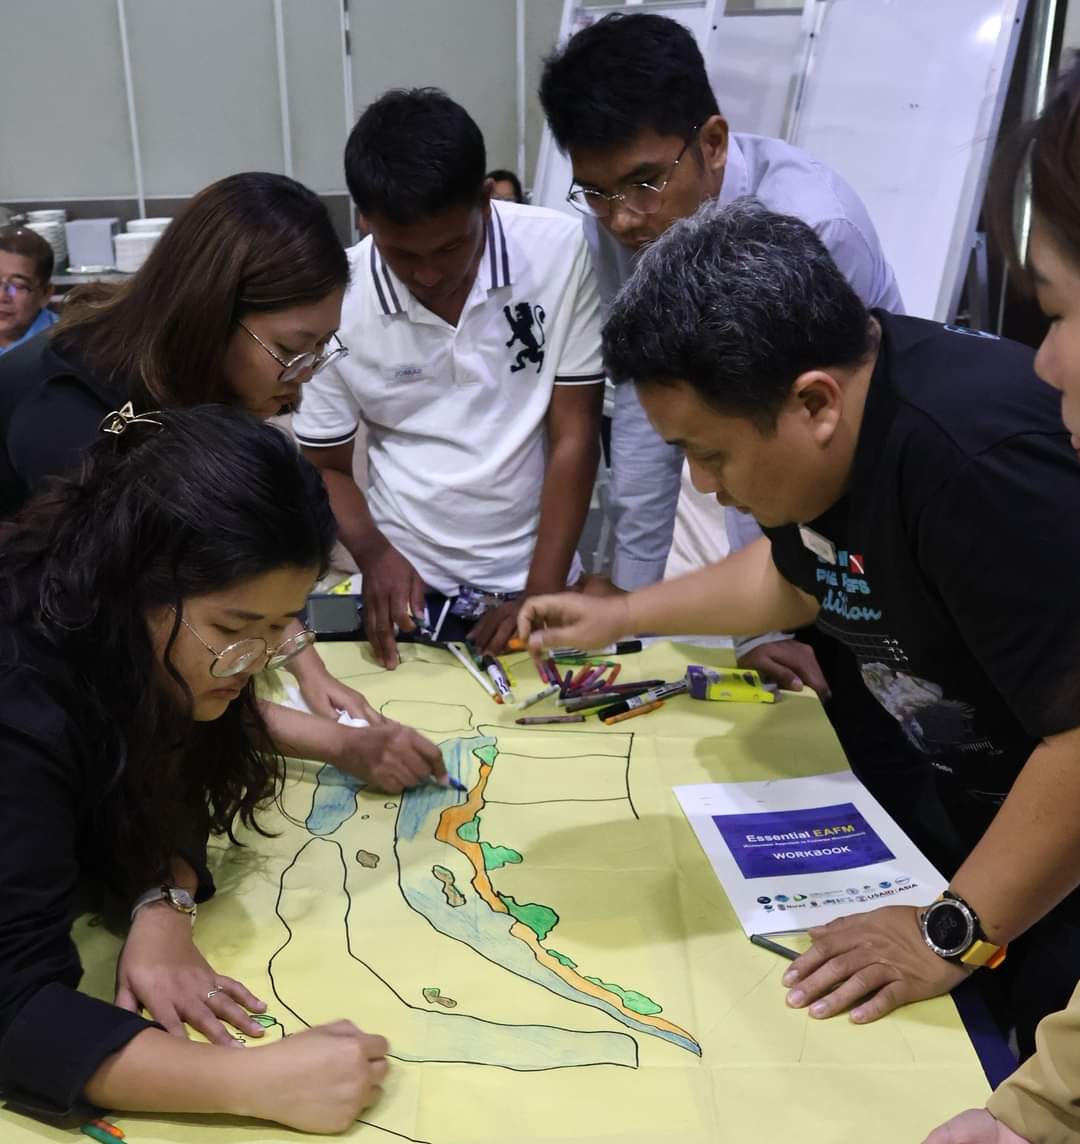 USAID Trains Civil Society Organizations to Promote Sustainable Fisheries Management in the Philippines